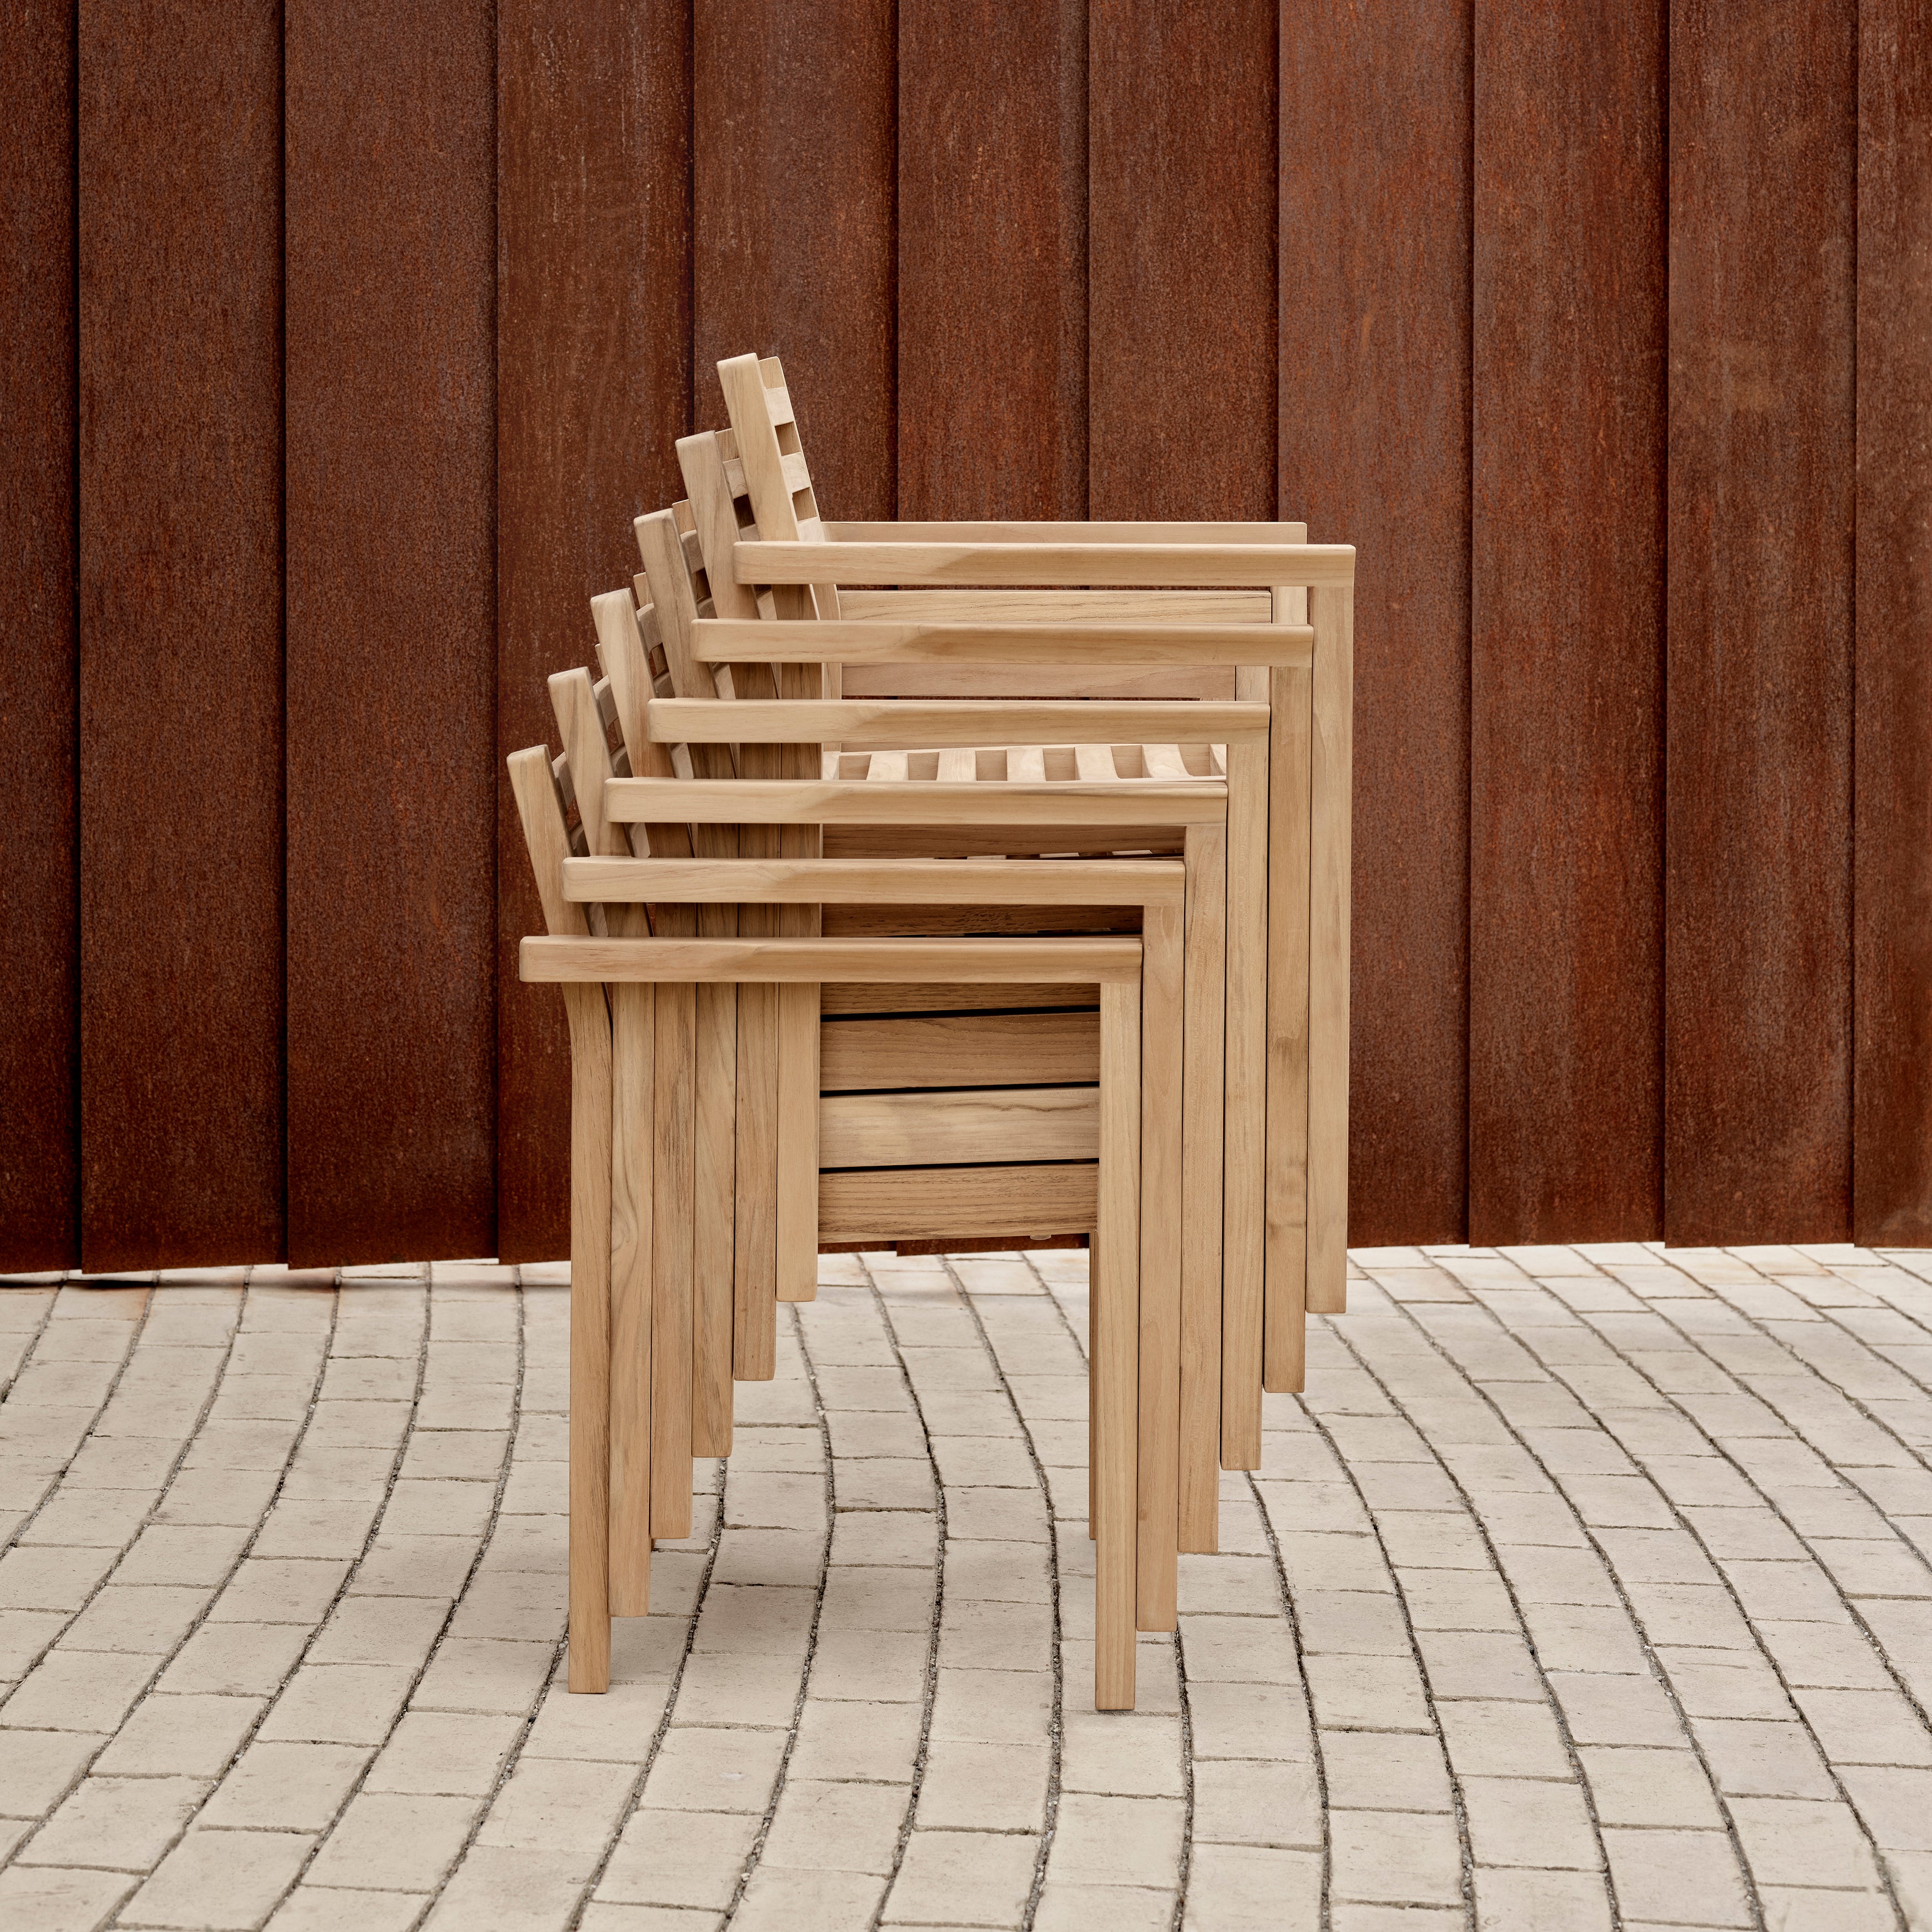 AH502 Outdoor Dining Chair with Armrest: Stacking